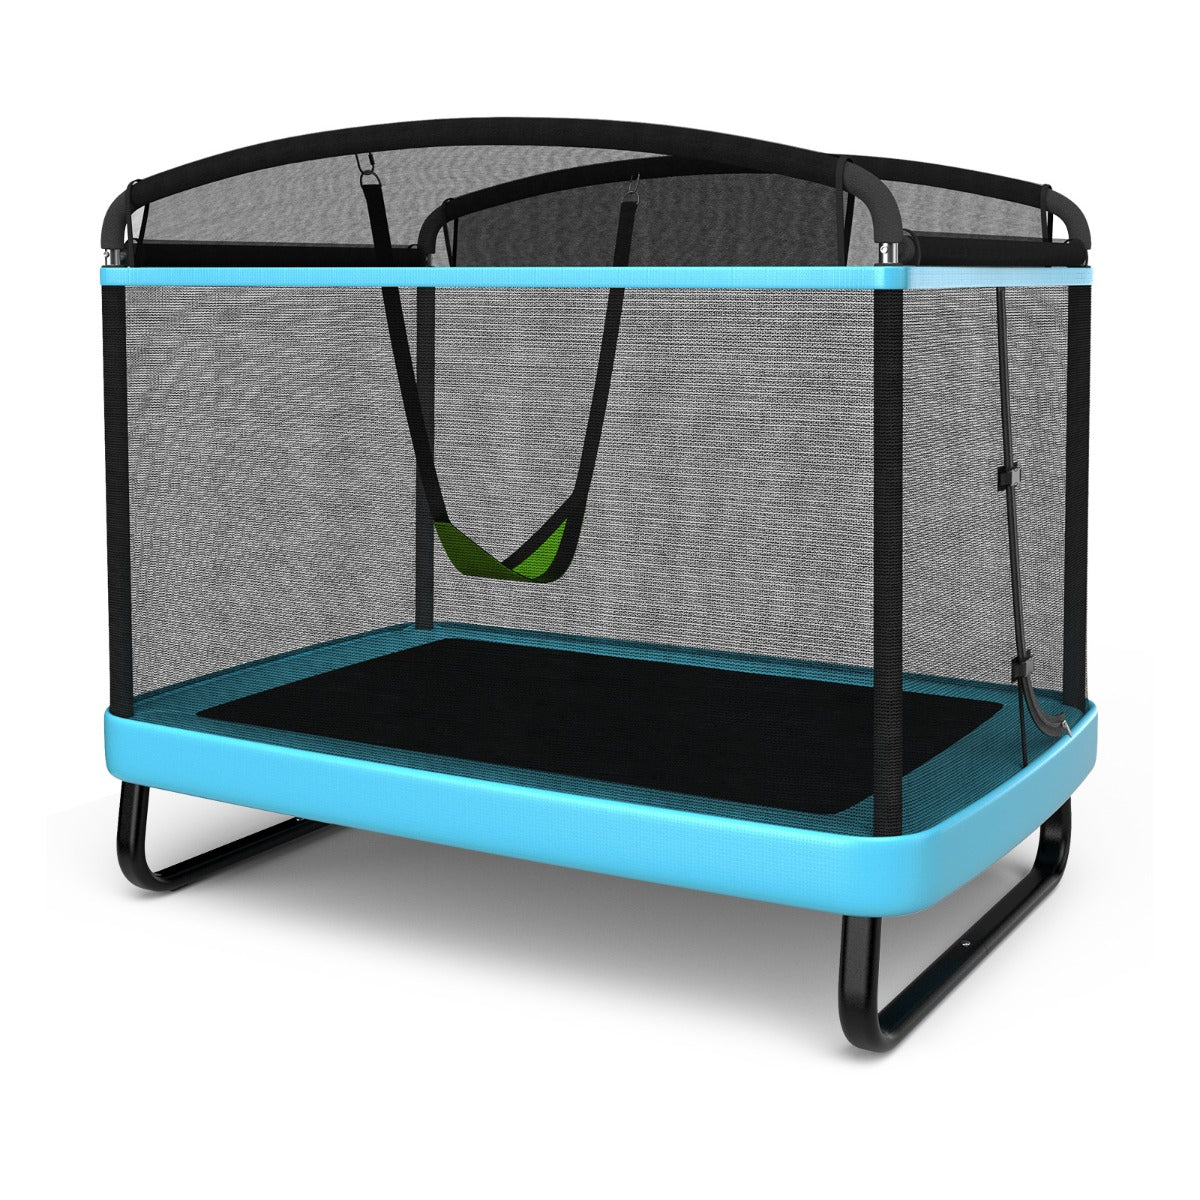 Active Fun: Sturdy Recreational Trampoline with Swing for Kids Blue